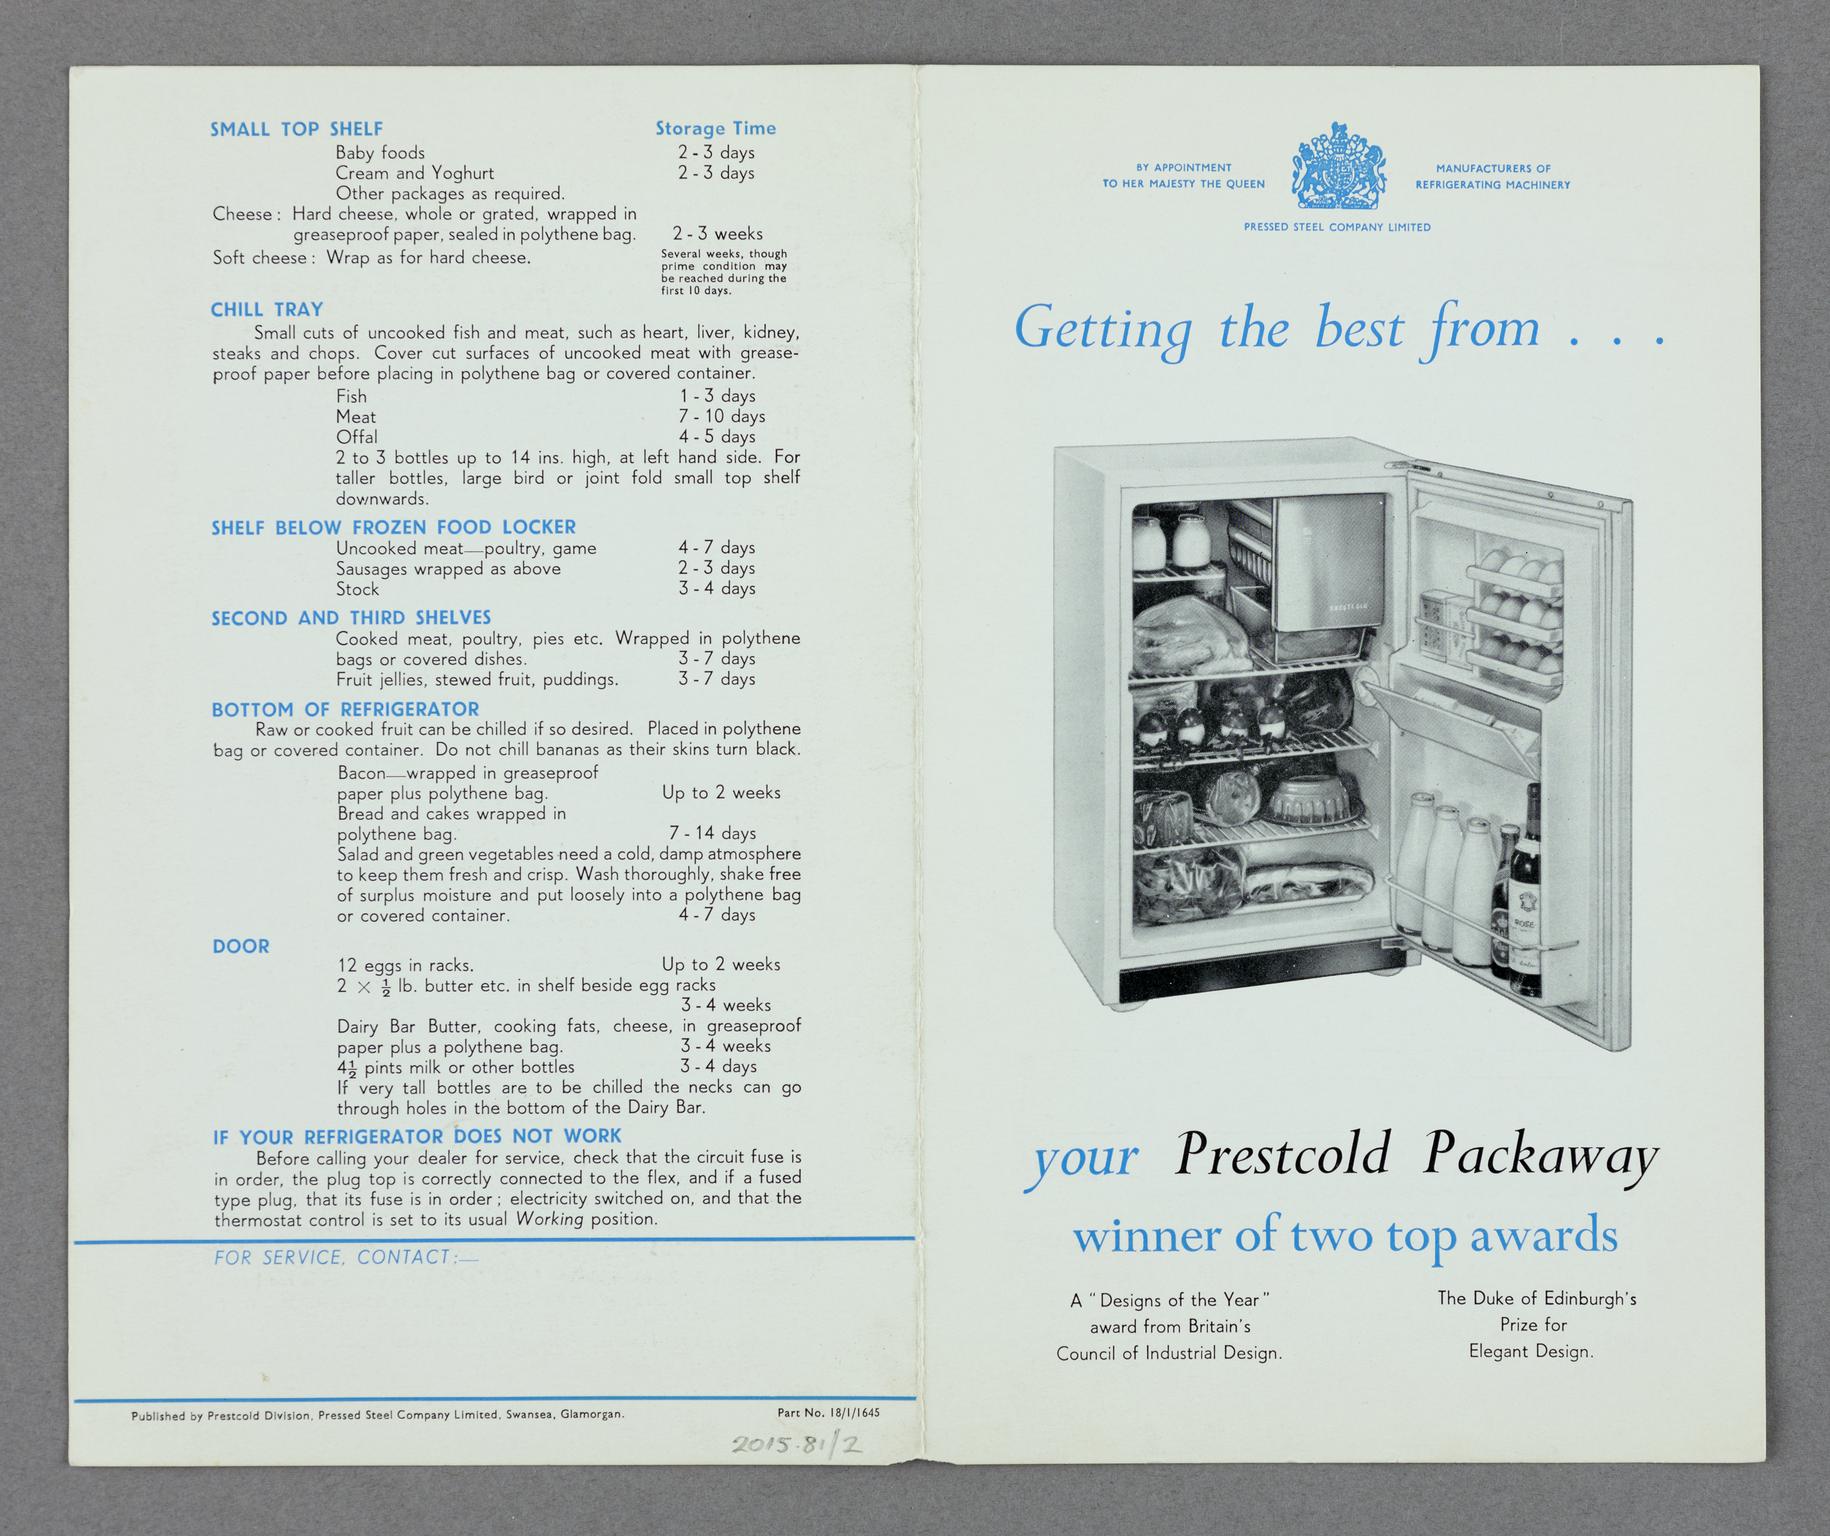 Getting the best from ... your Prestcold Packaway (leaflet)